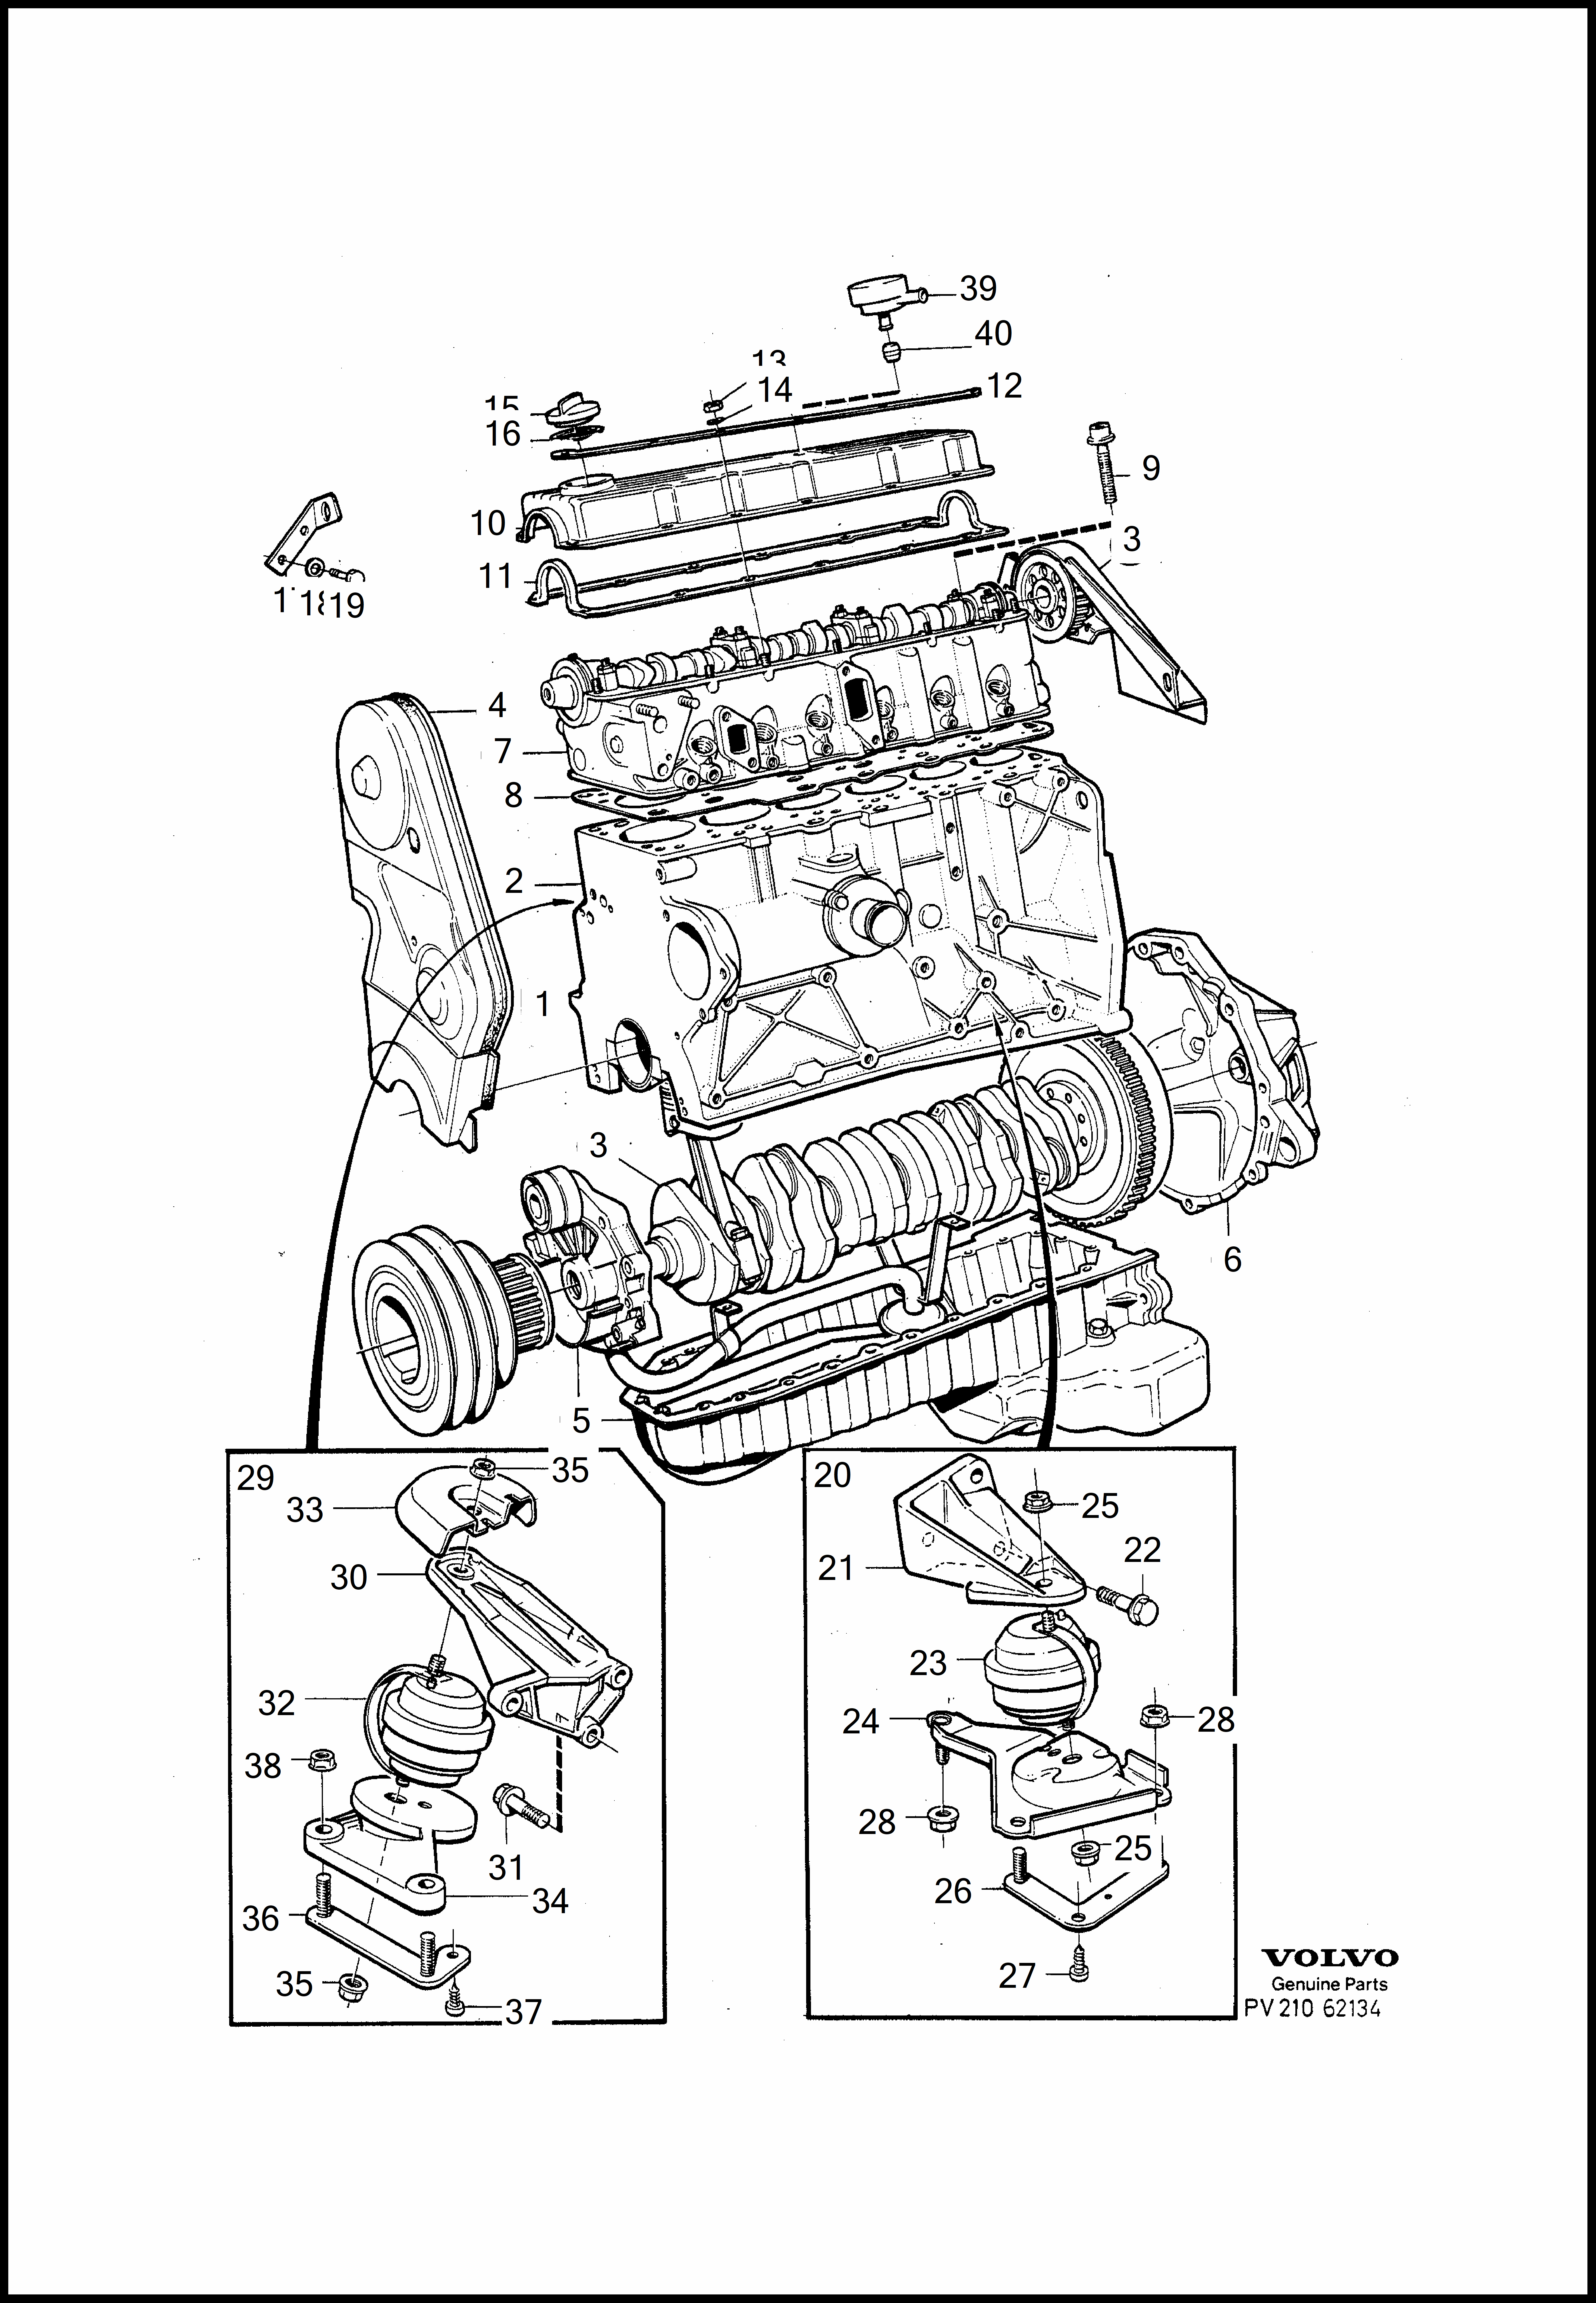 engine with fittings per Volvo 960 960